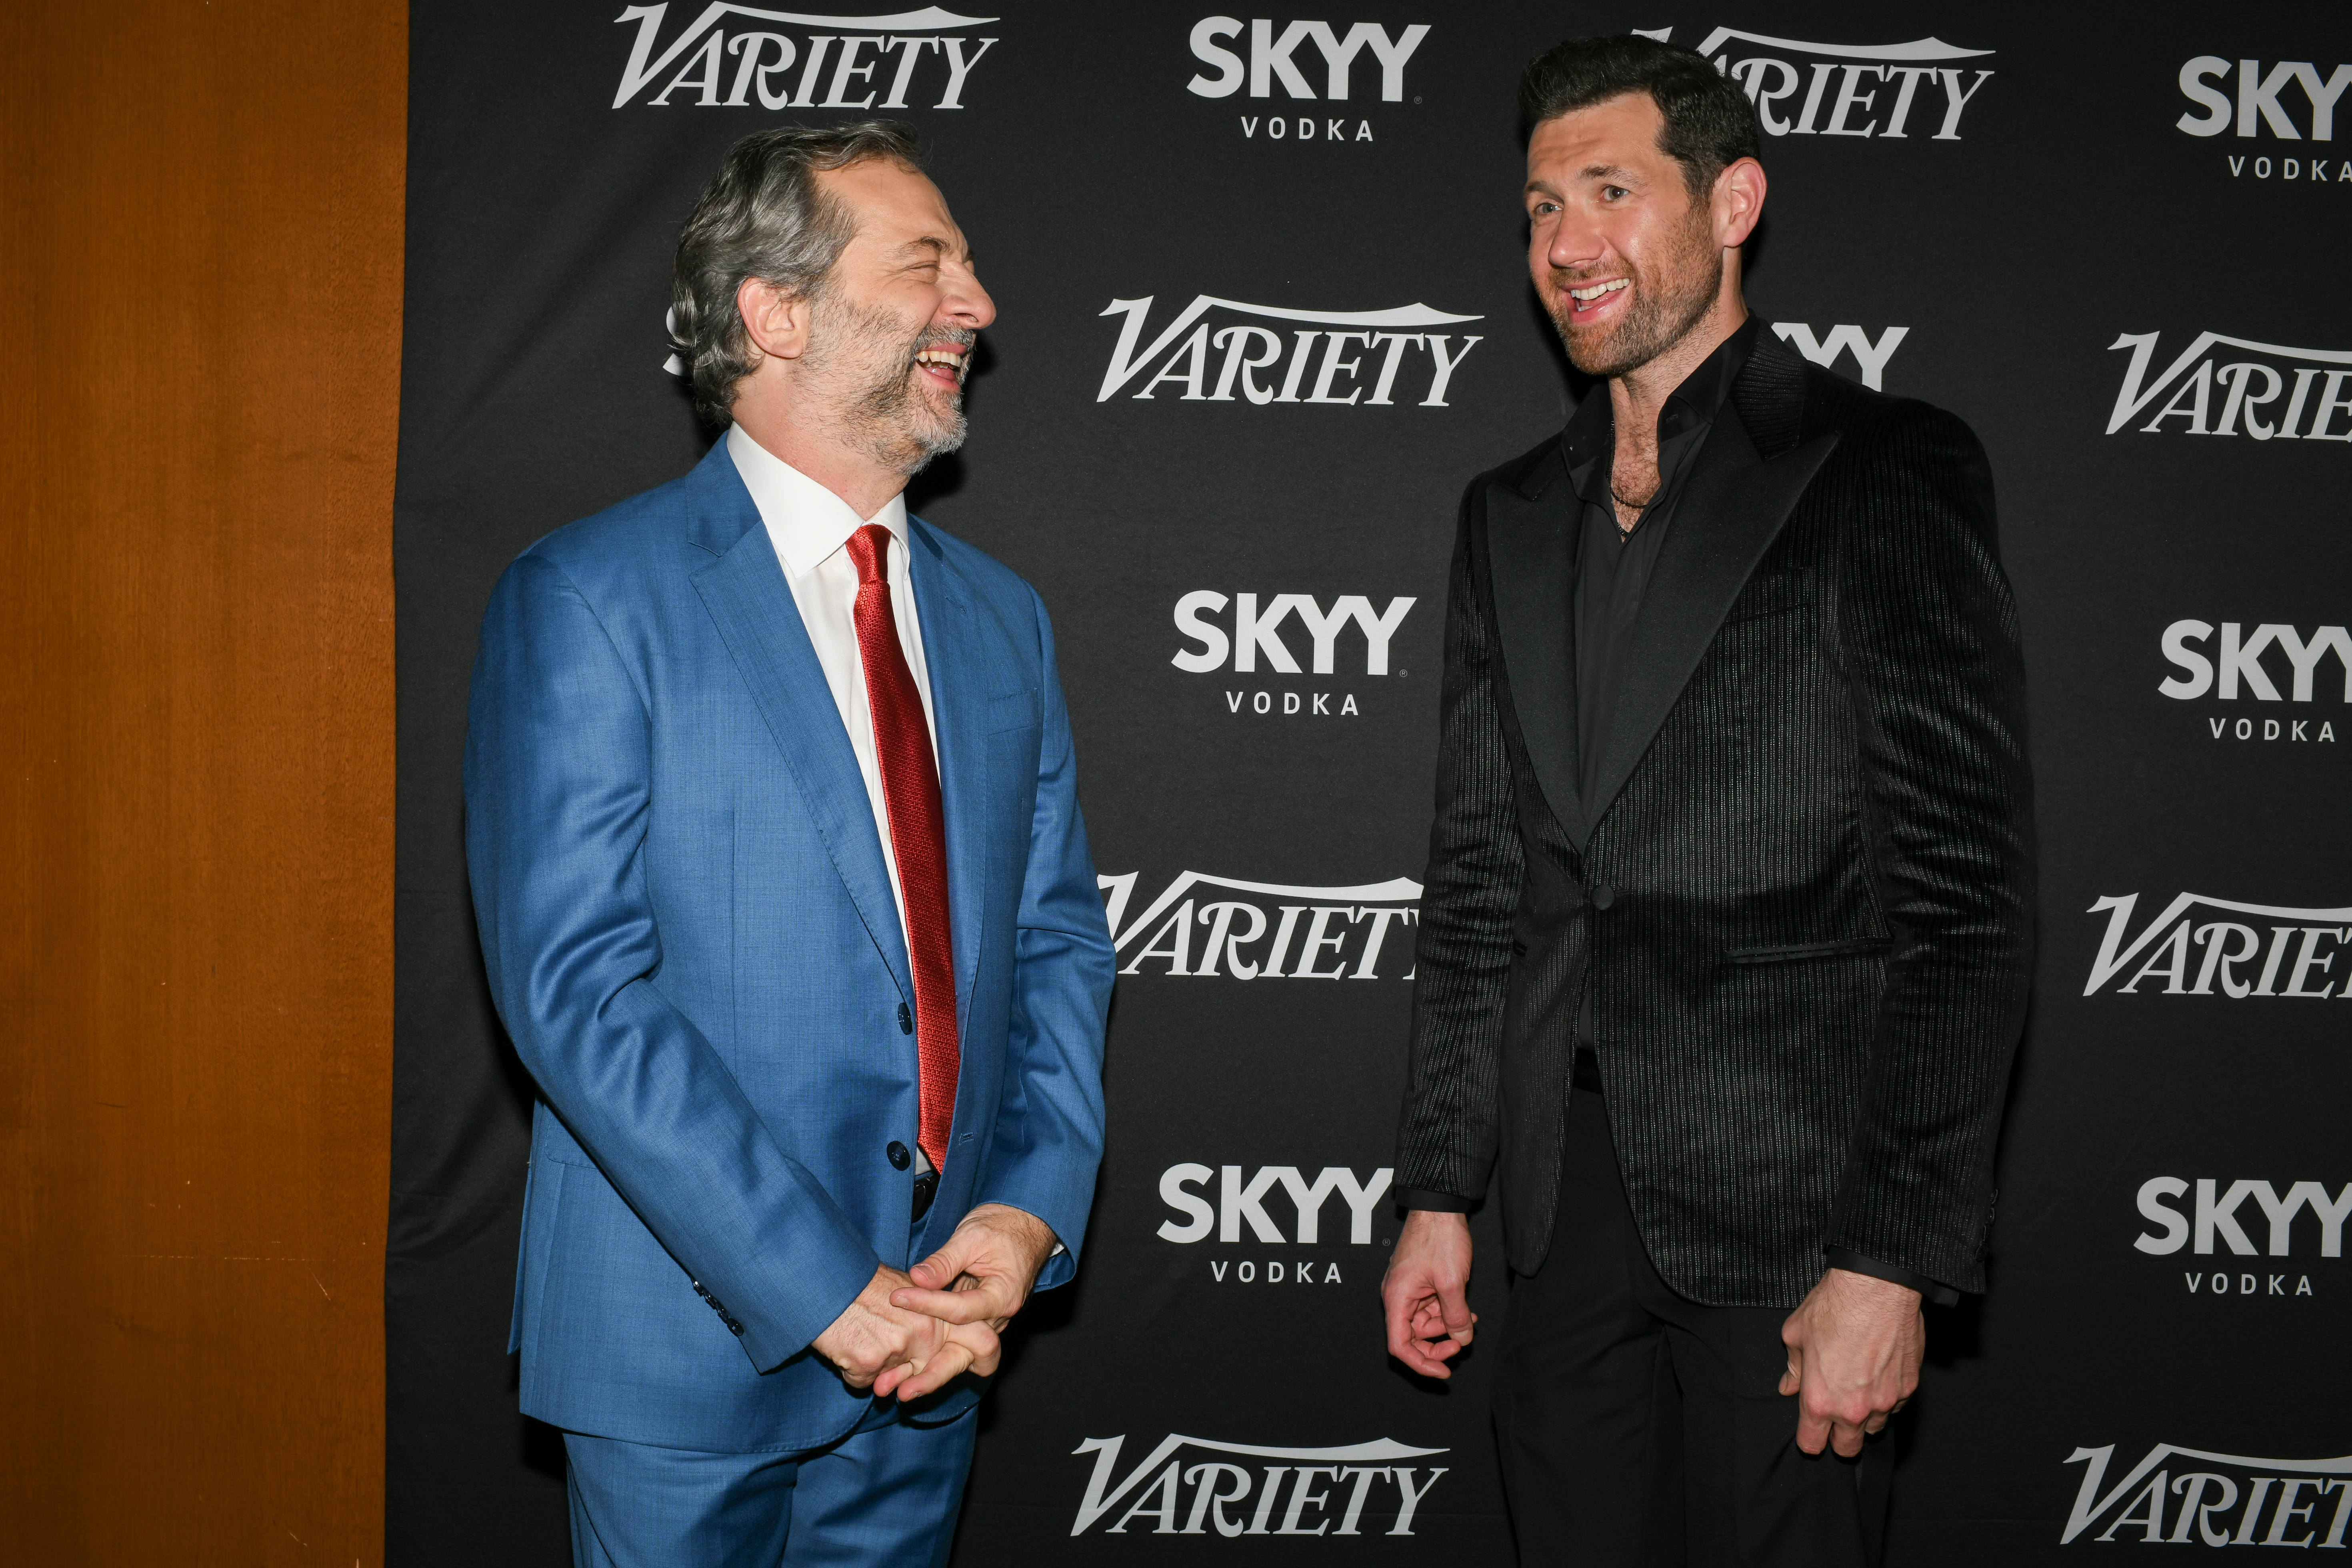 Judd Apatow and Billy Eichner